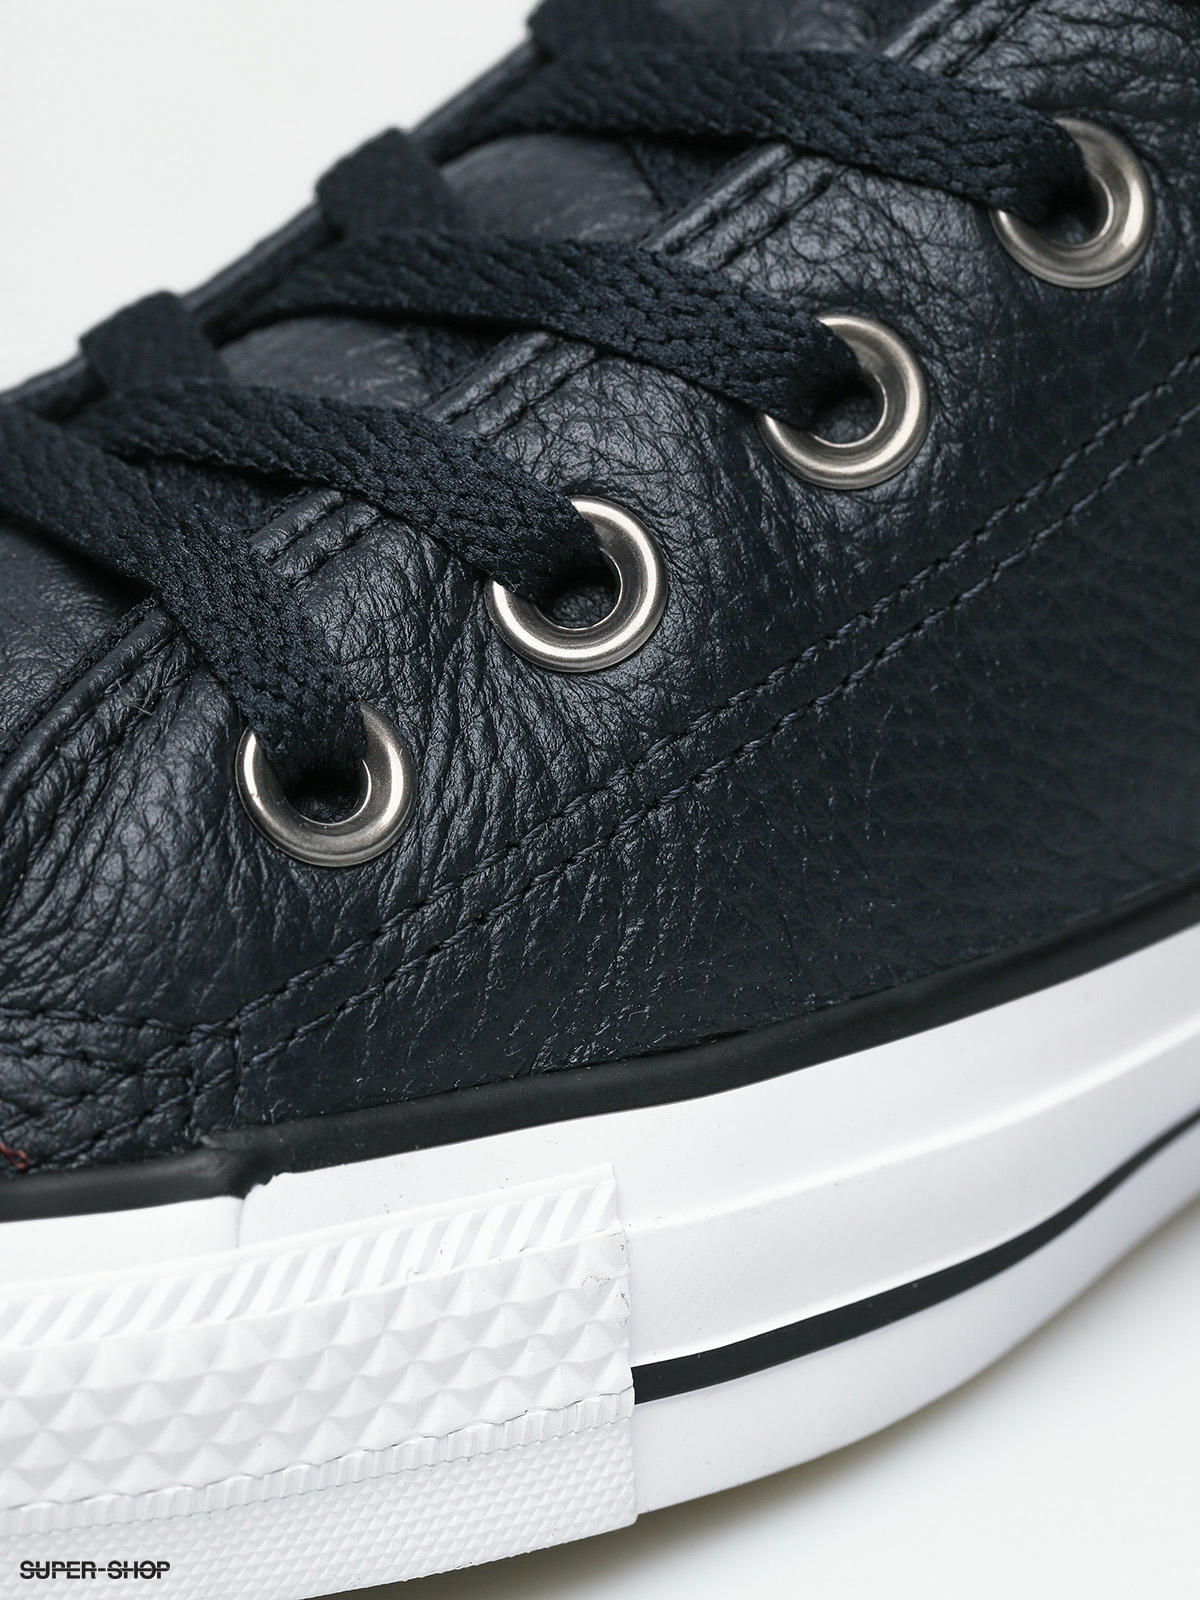 leather converse all star black